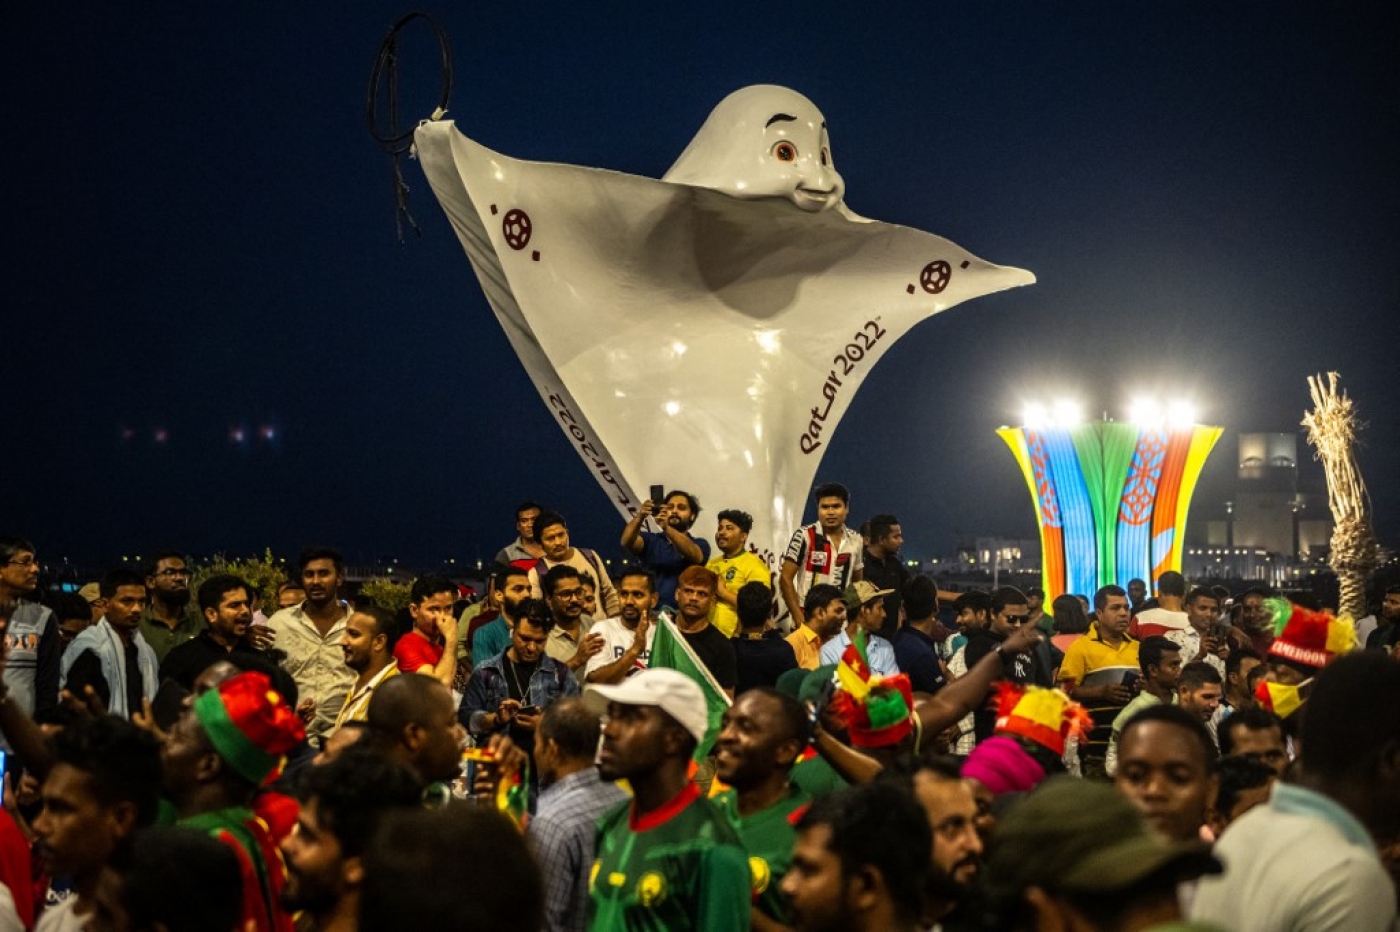 People gather in front of the offical mascot La'eeb at Corniche promenade in Doha on 18 November 2022, ahead of the Qatar 2022 World Cup football tournament (AFP)